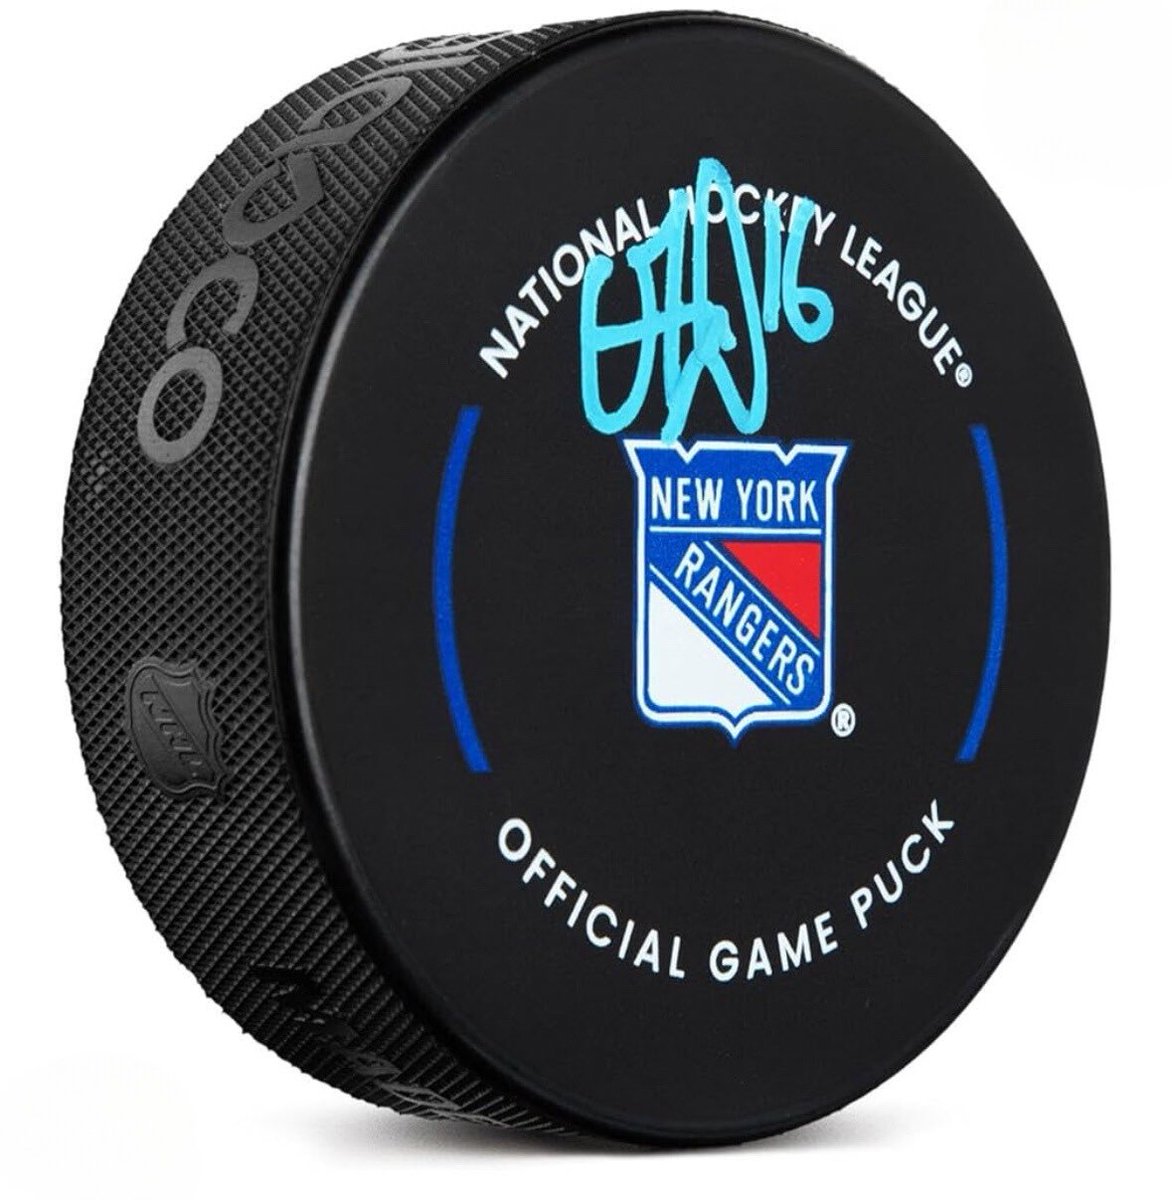 LETS GO RANGERS #NYR If Trocheck scores and the Rangers win tonight, we will give a lucky follower this puck signed by Vincent Trocheck 🥅 Repost to enter 🥅 Best of luck!